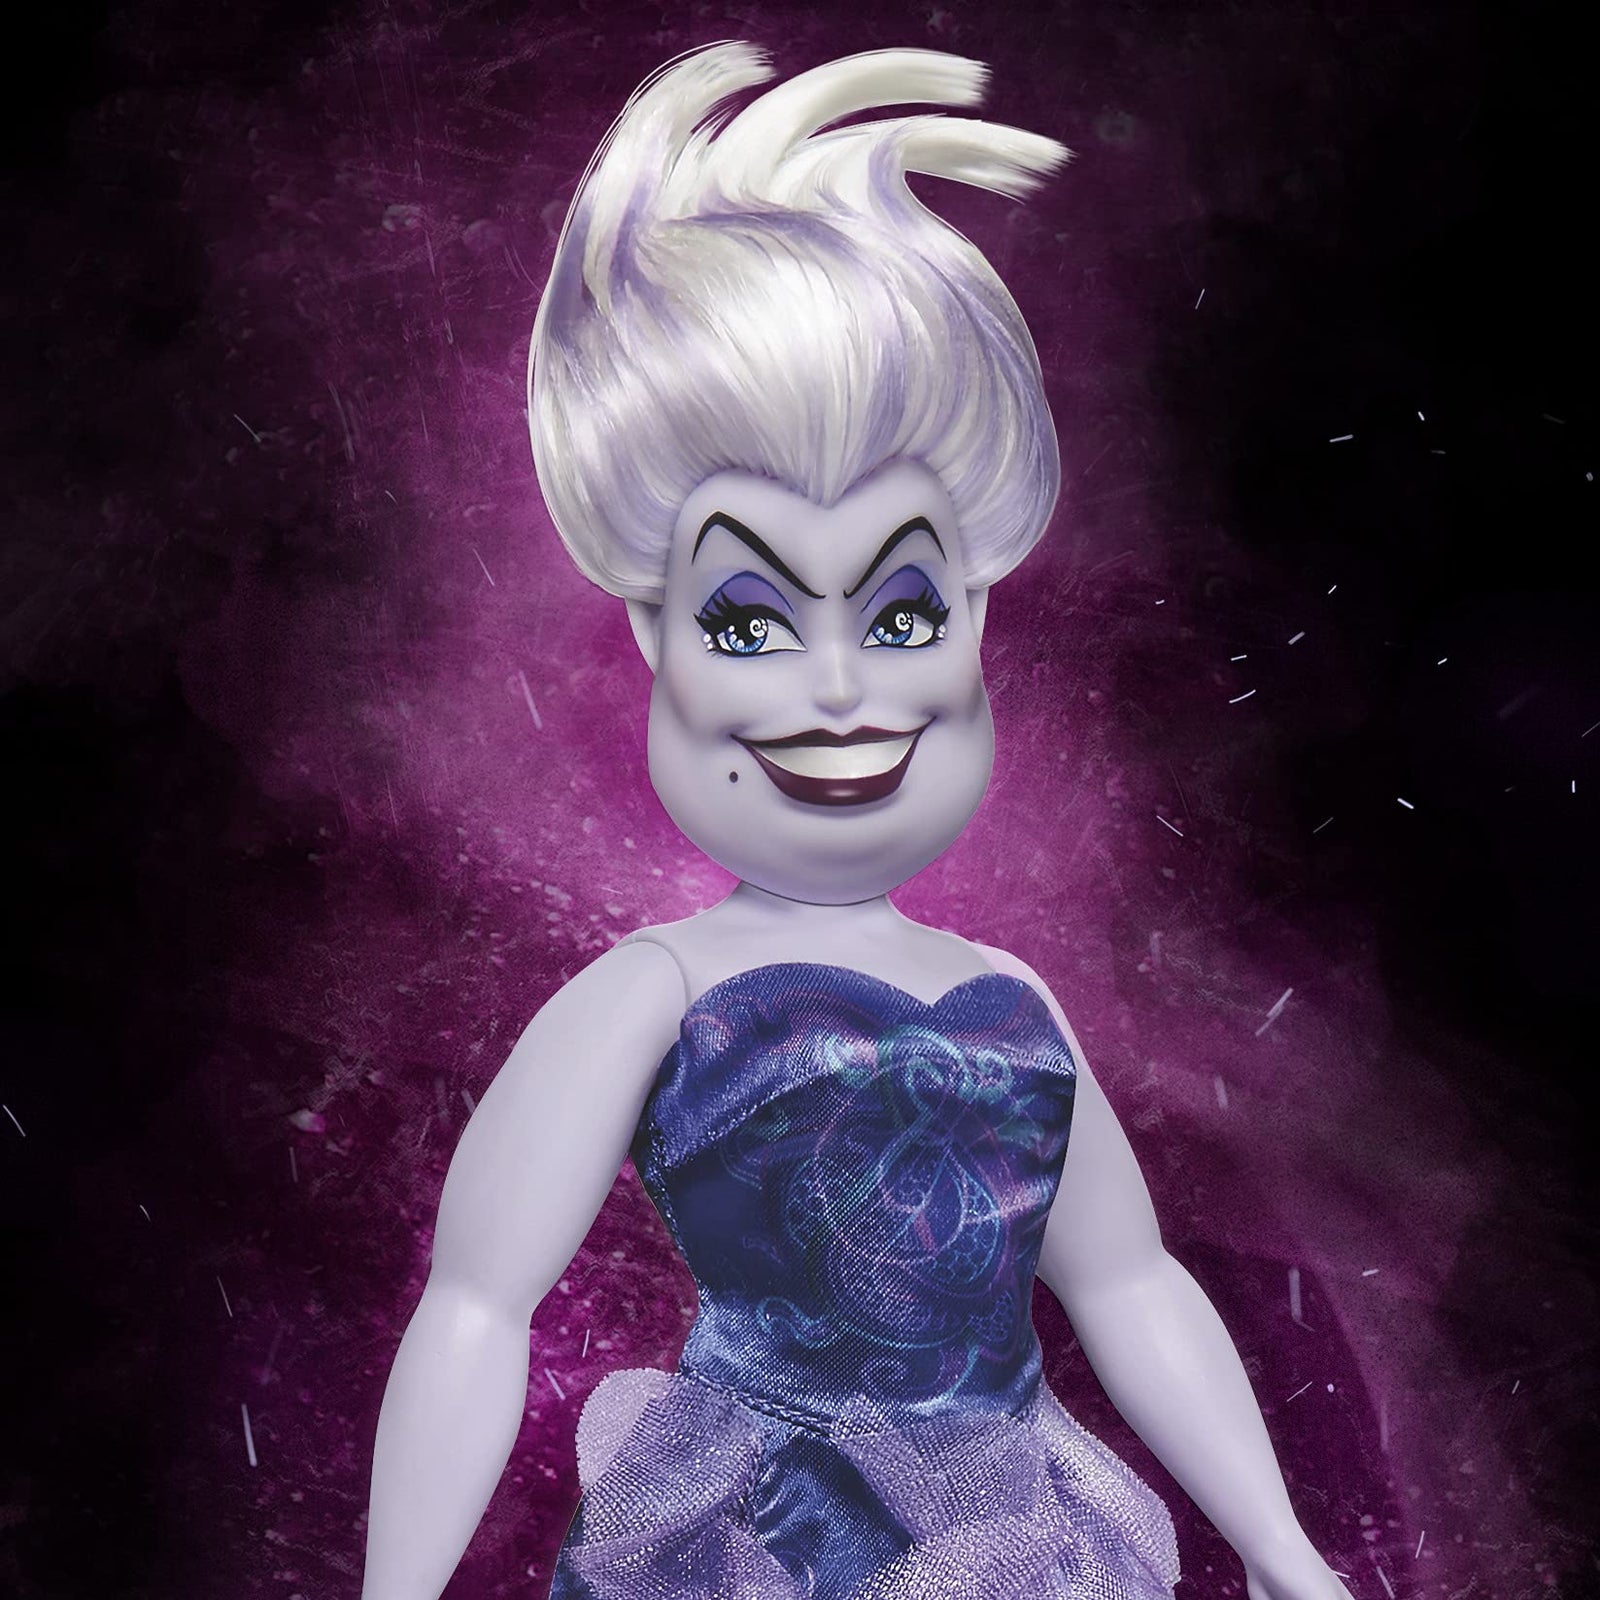 Disney Villains Ursula Fashion Doll, Accessories and Removable Clothes, Disney Villains Toy for Kids 5 Years Old and Up